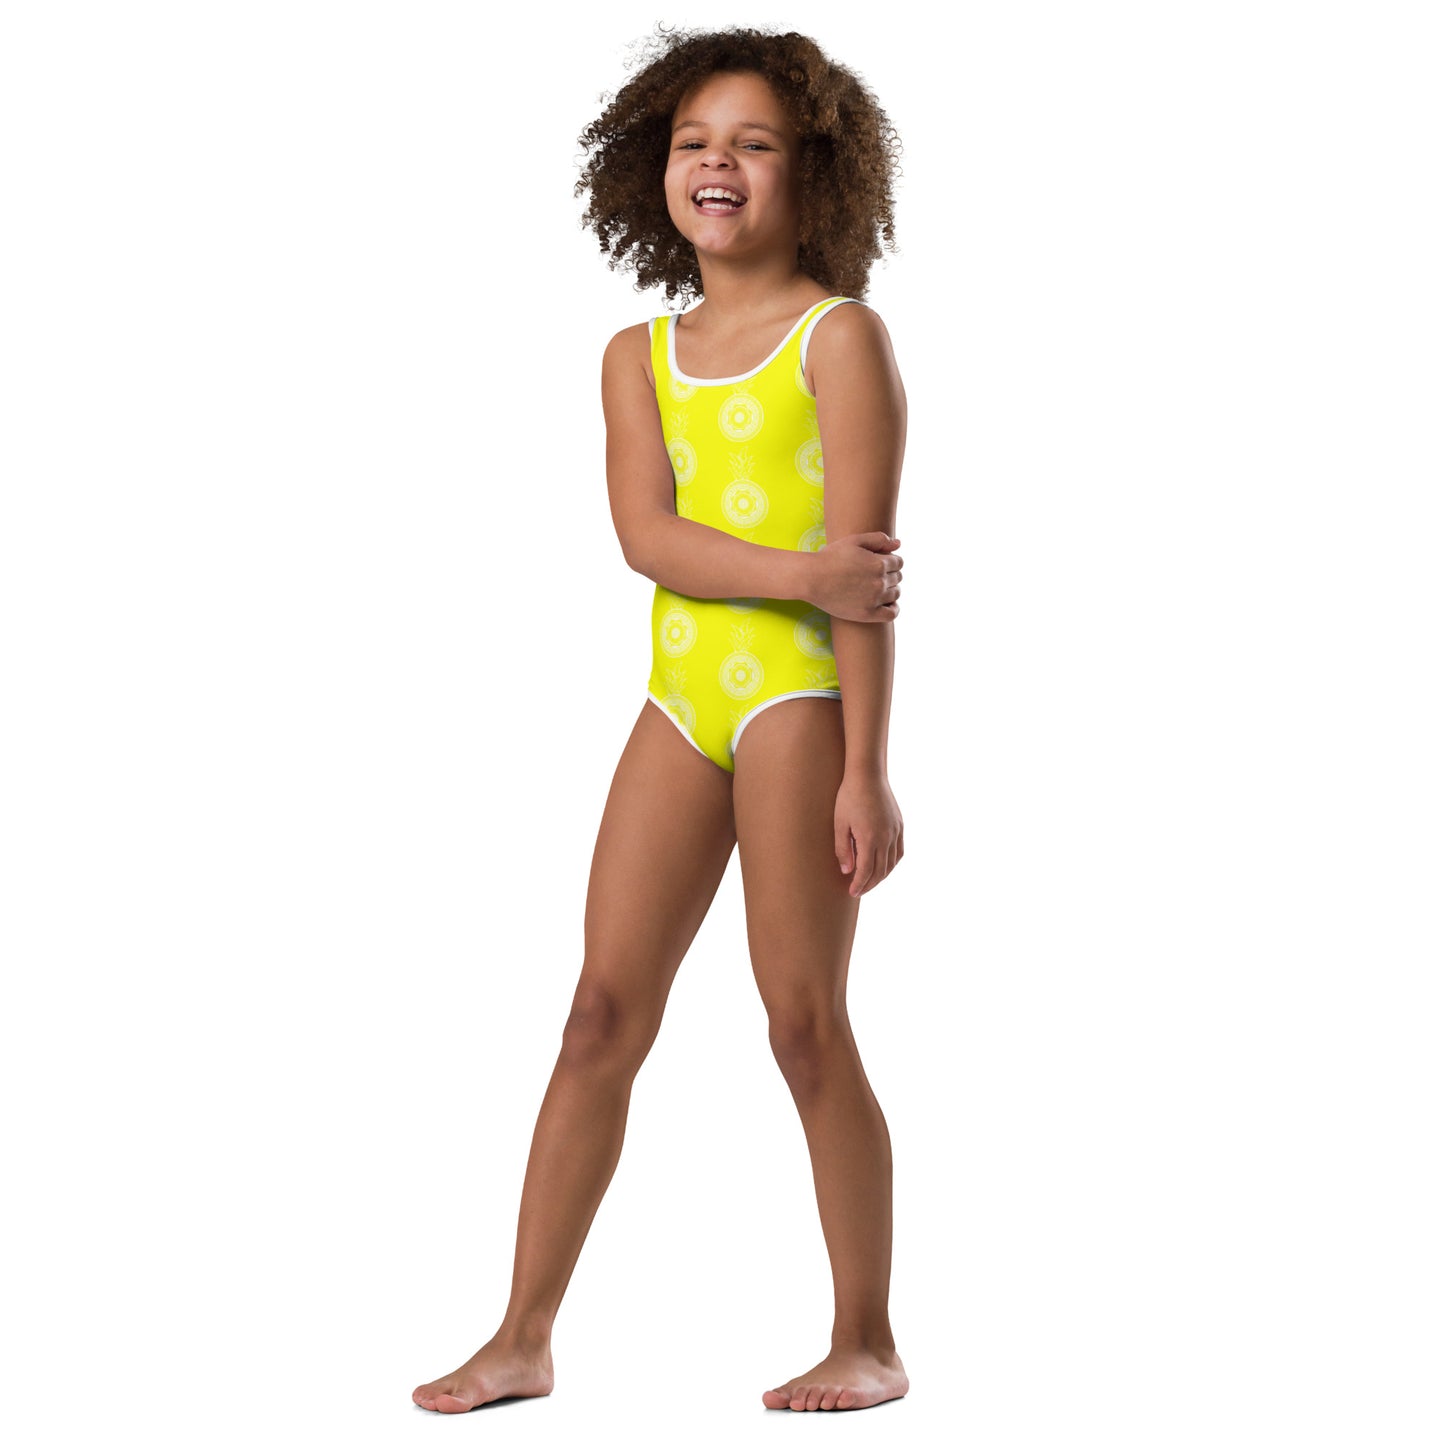 Annovero Pineapple Kids Swimsuit Sizes 2T-7